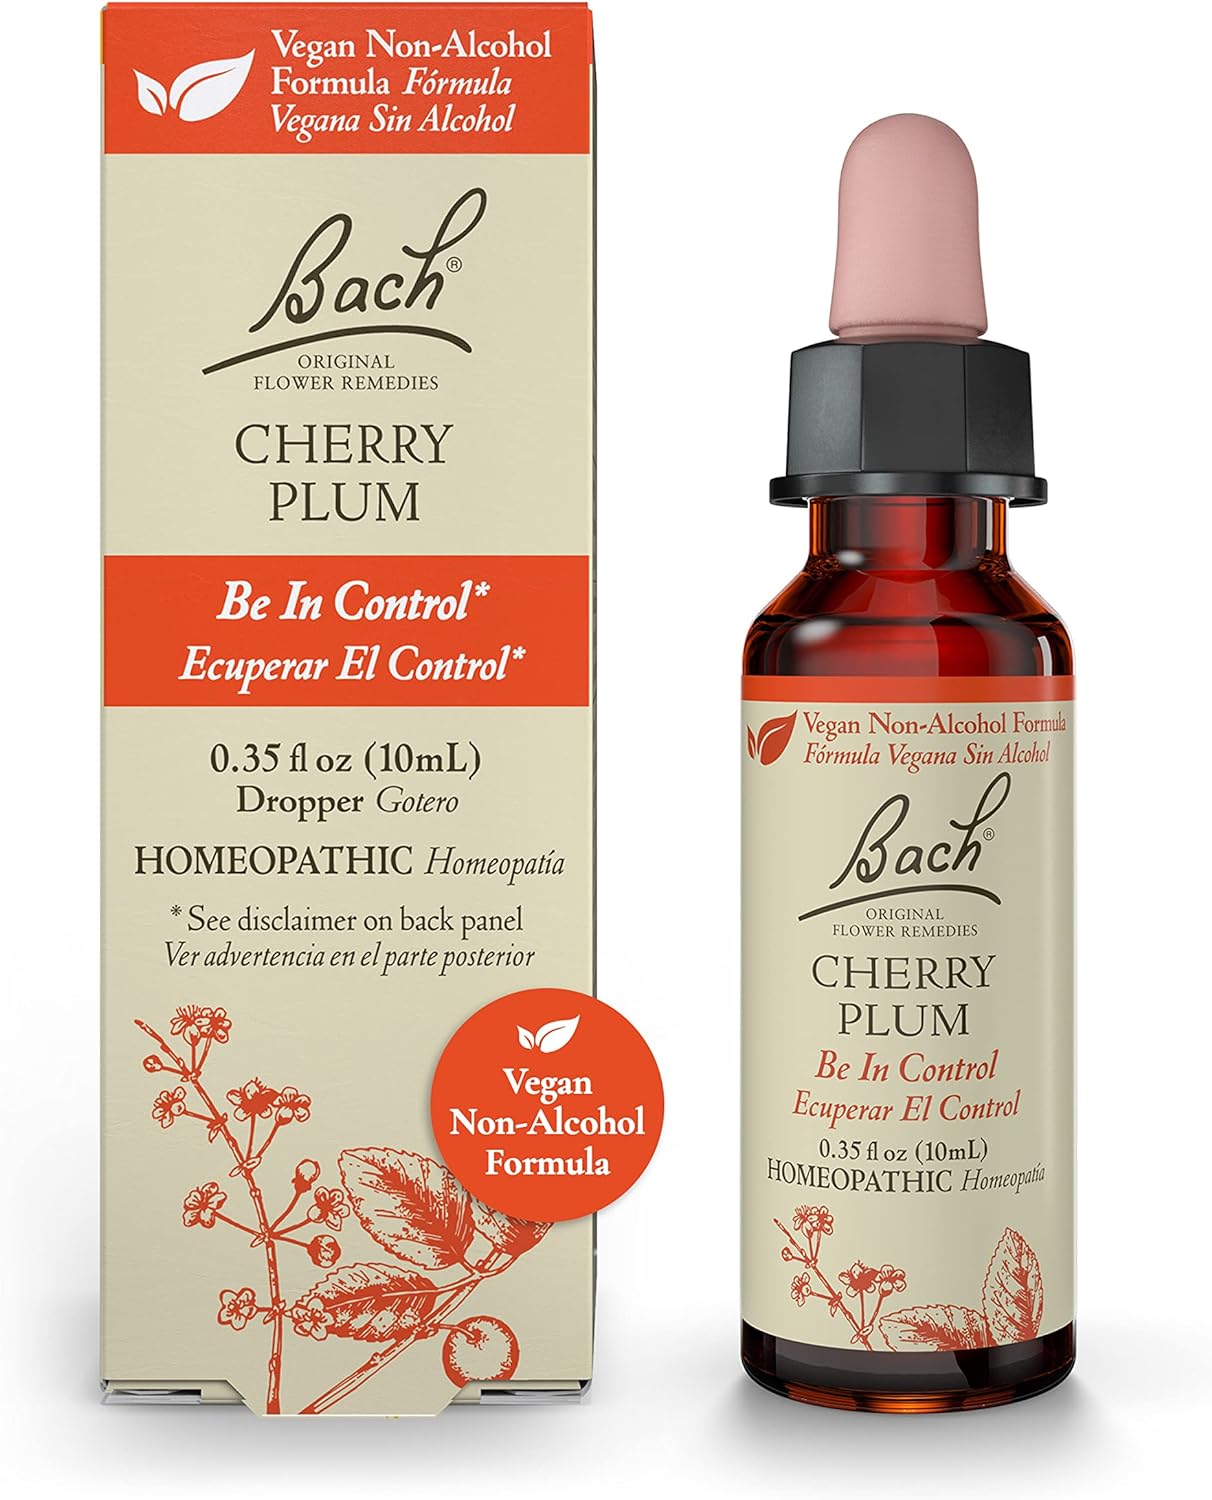 Bach Original Flower Remedies, Cherry Plum for Control (Non-Alcohol Formula), Natural Homeopathic Flower Essence, Holistic Wellness and Stress Relief, Vegan, 10mL Dropper